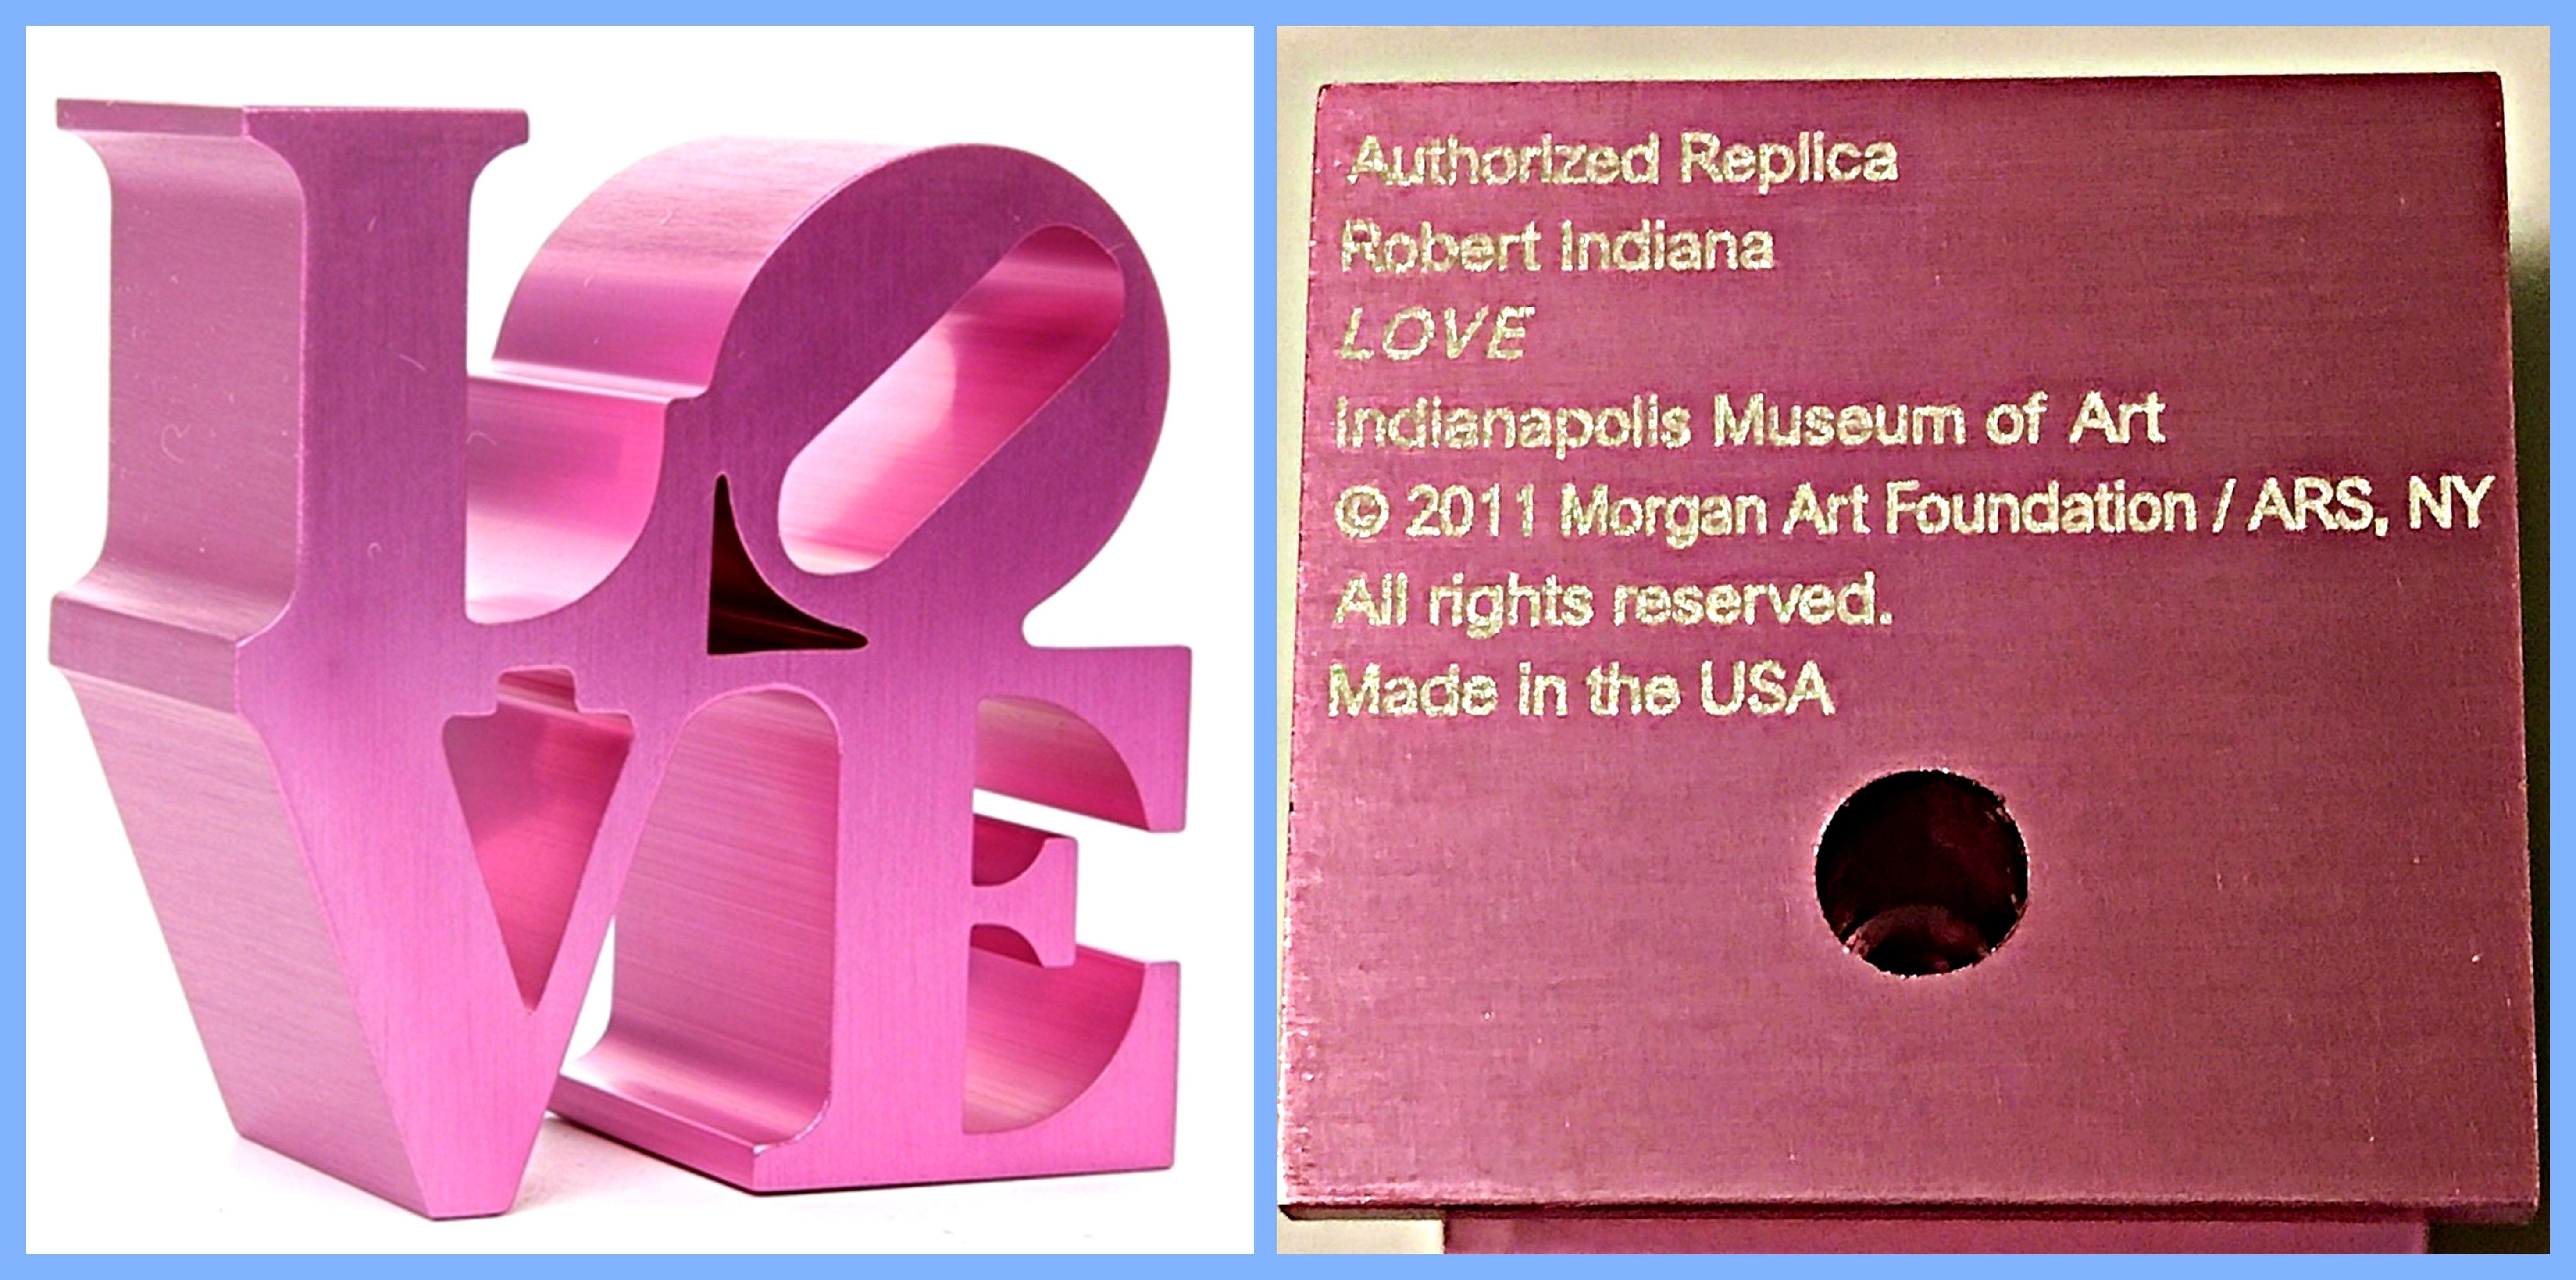 Robert Indiana Abstract Sculpture - LOVE (Pink) sculpture, official replica with Indianapolis Museum of Art stamp 